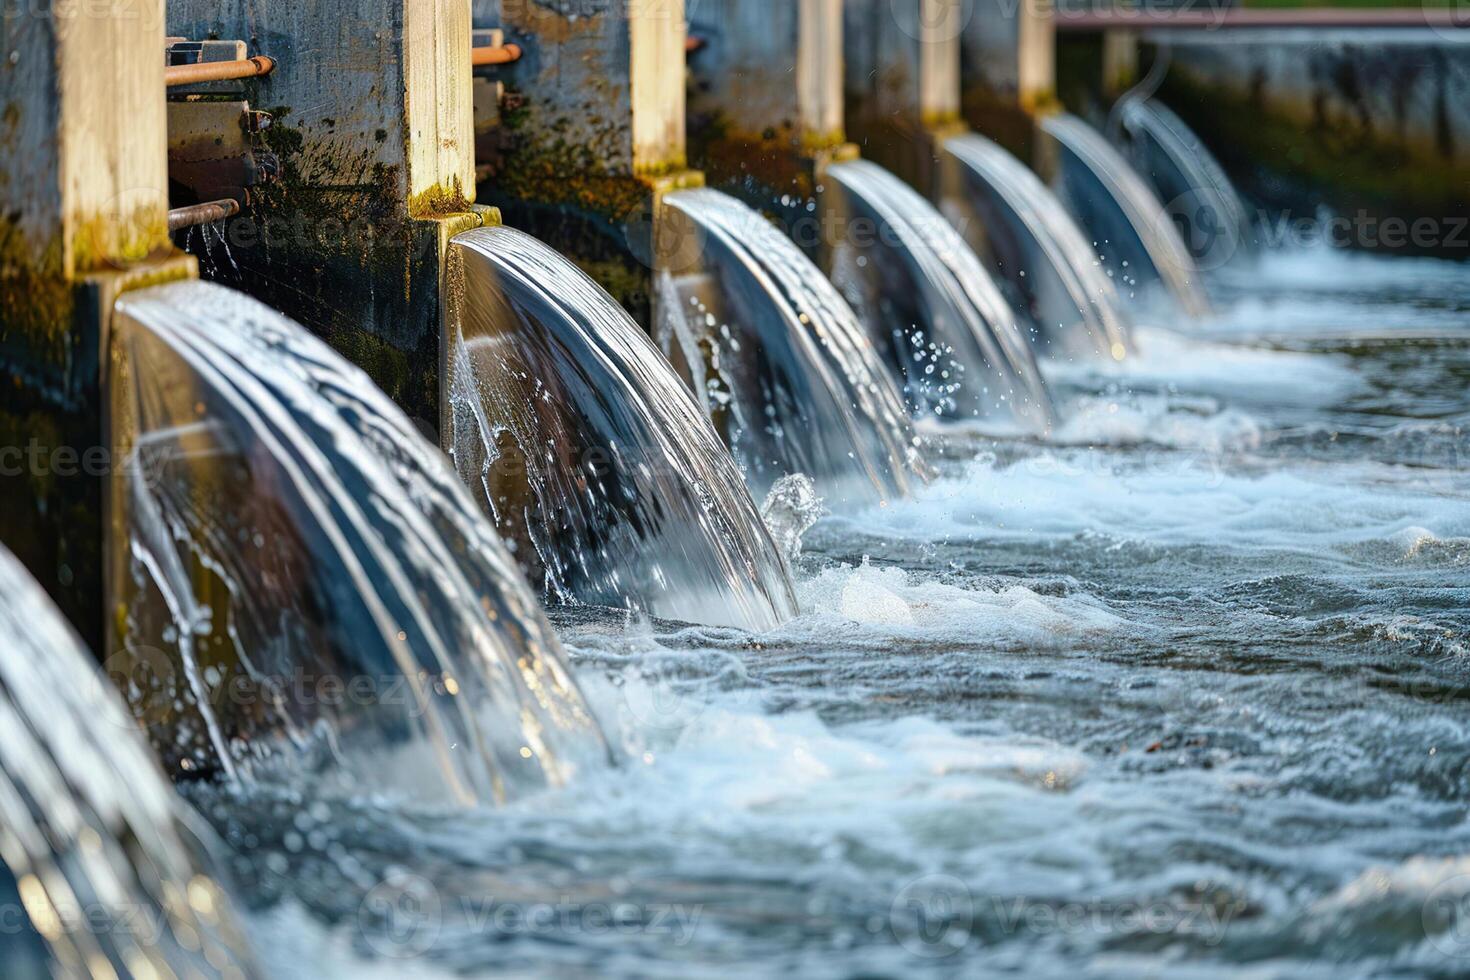 Hydroelectric power energy plant with large turbines and water spills photo